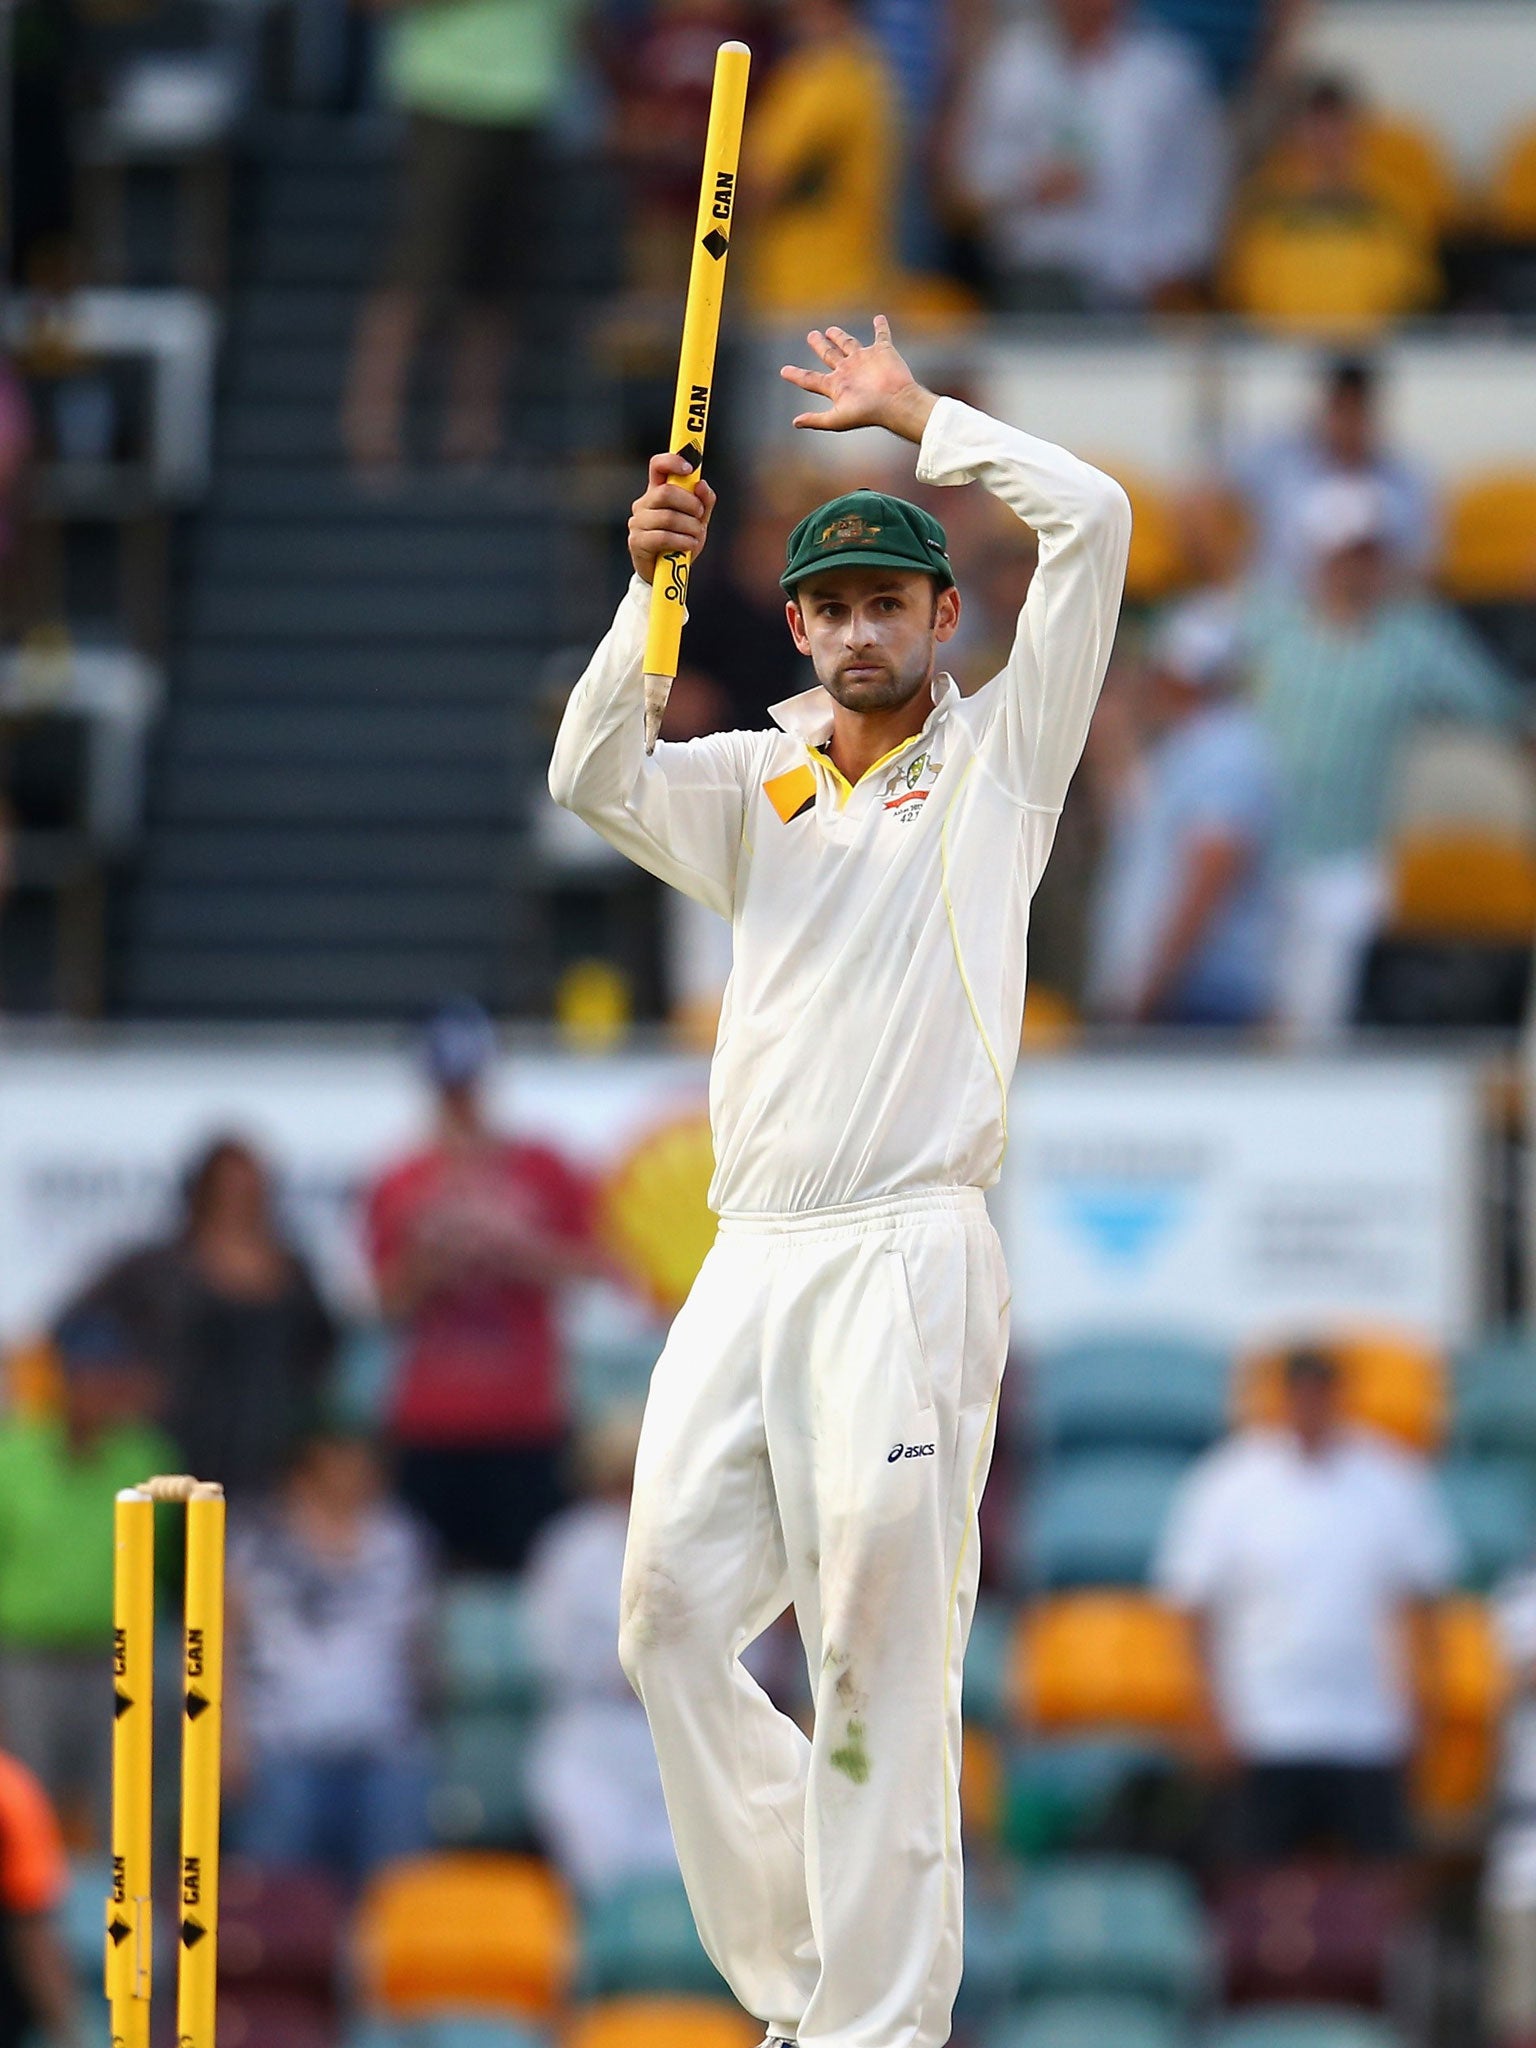 Nathan Lyon claims the spoils of victory at The Gabba